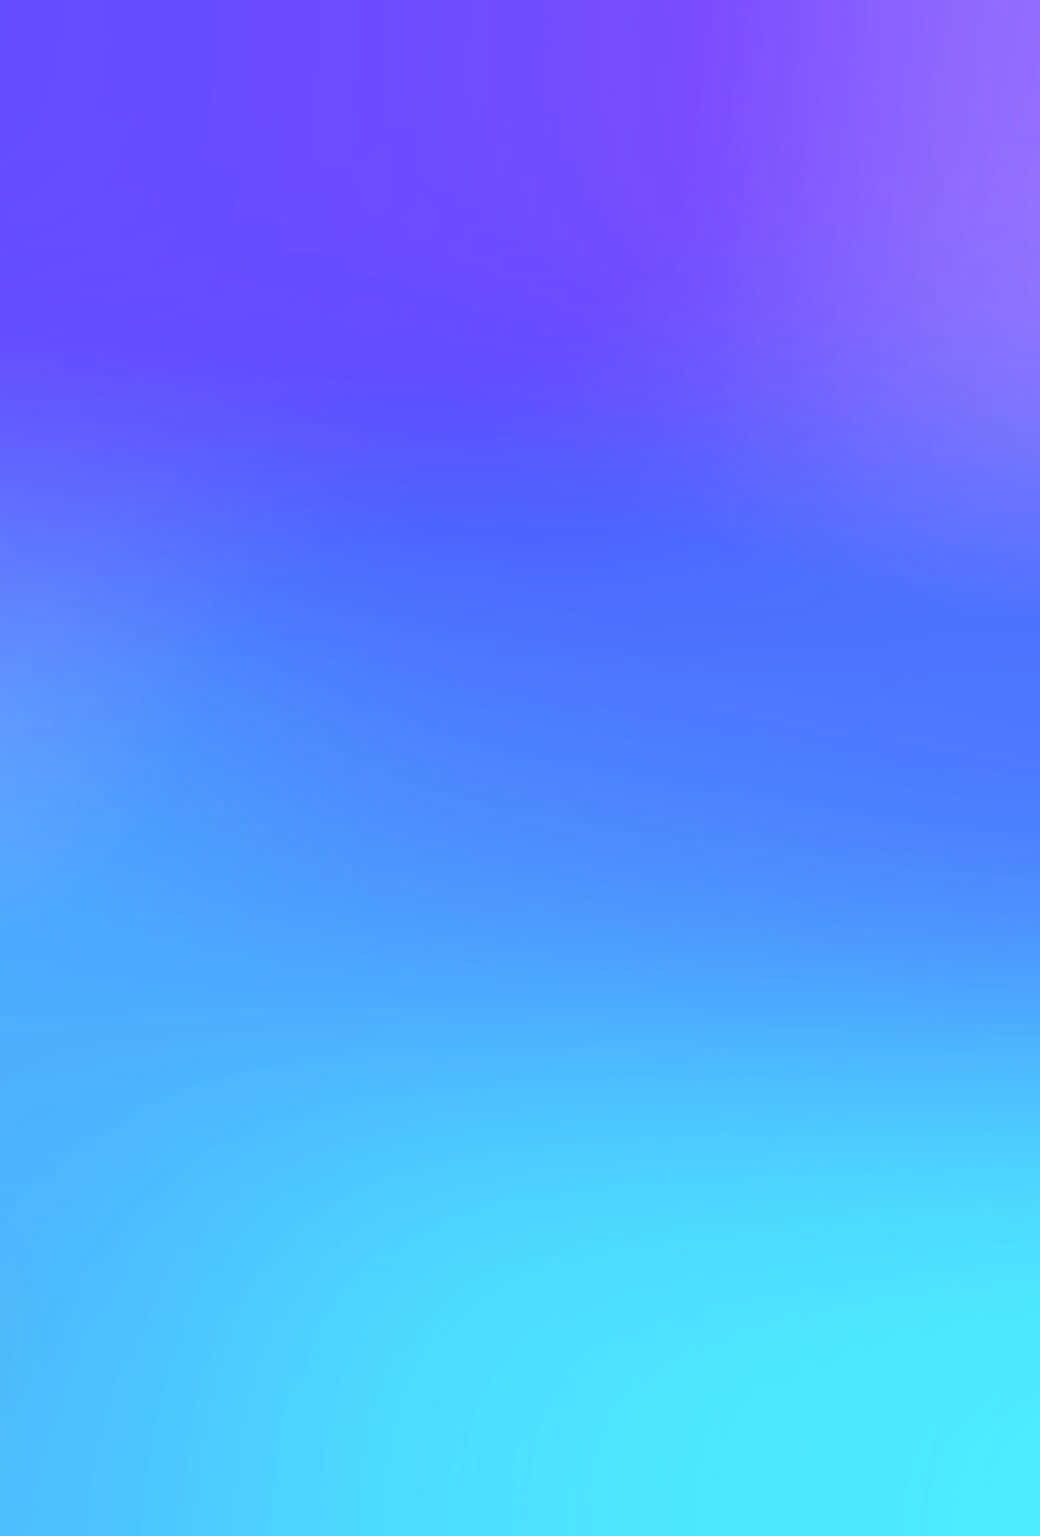 Light Blue To Purple Solid Color Phone Wallpaper